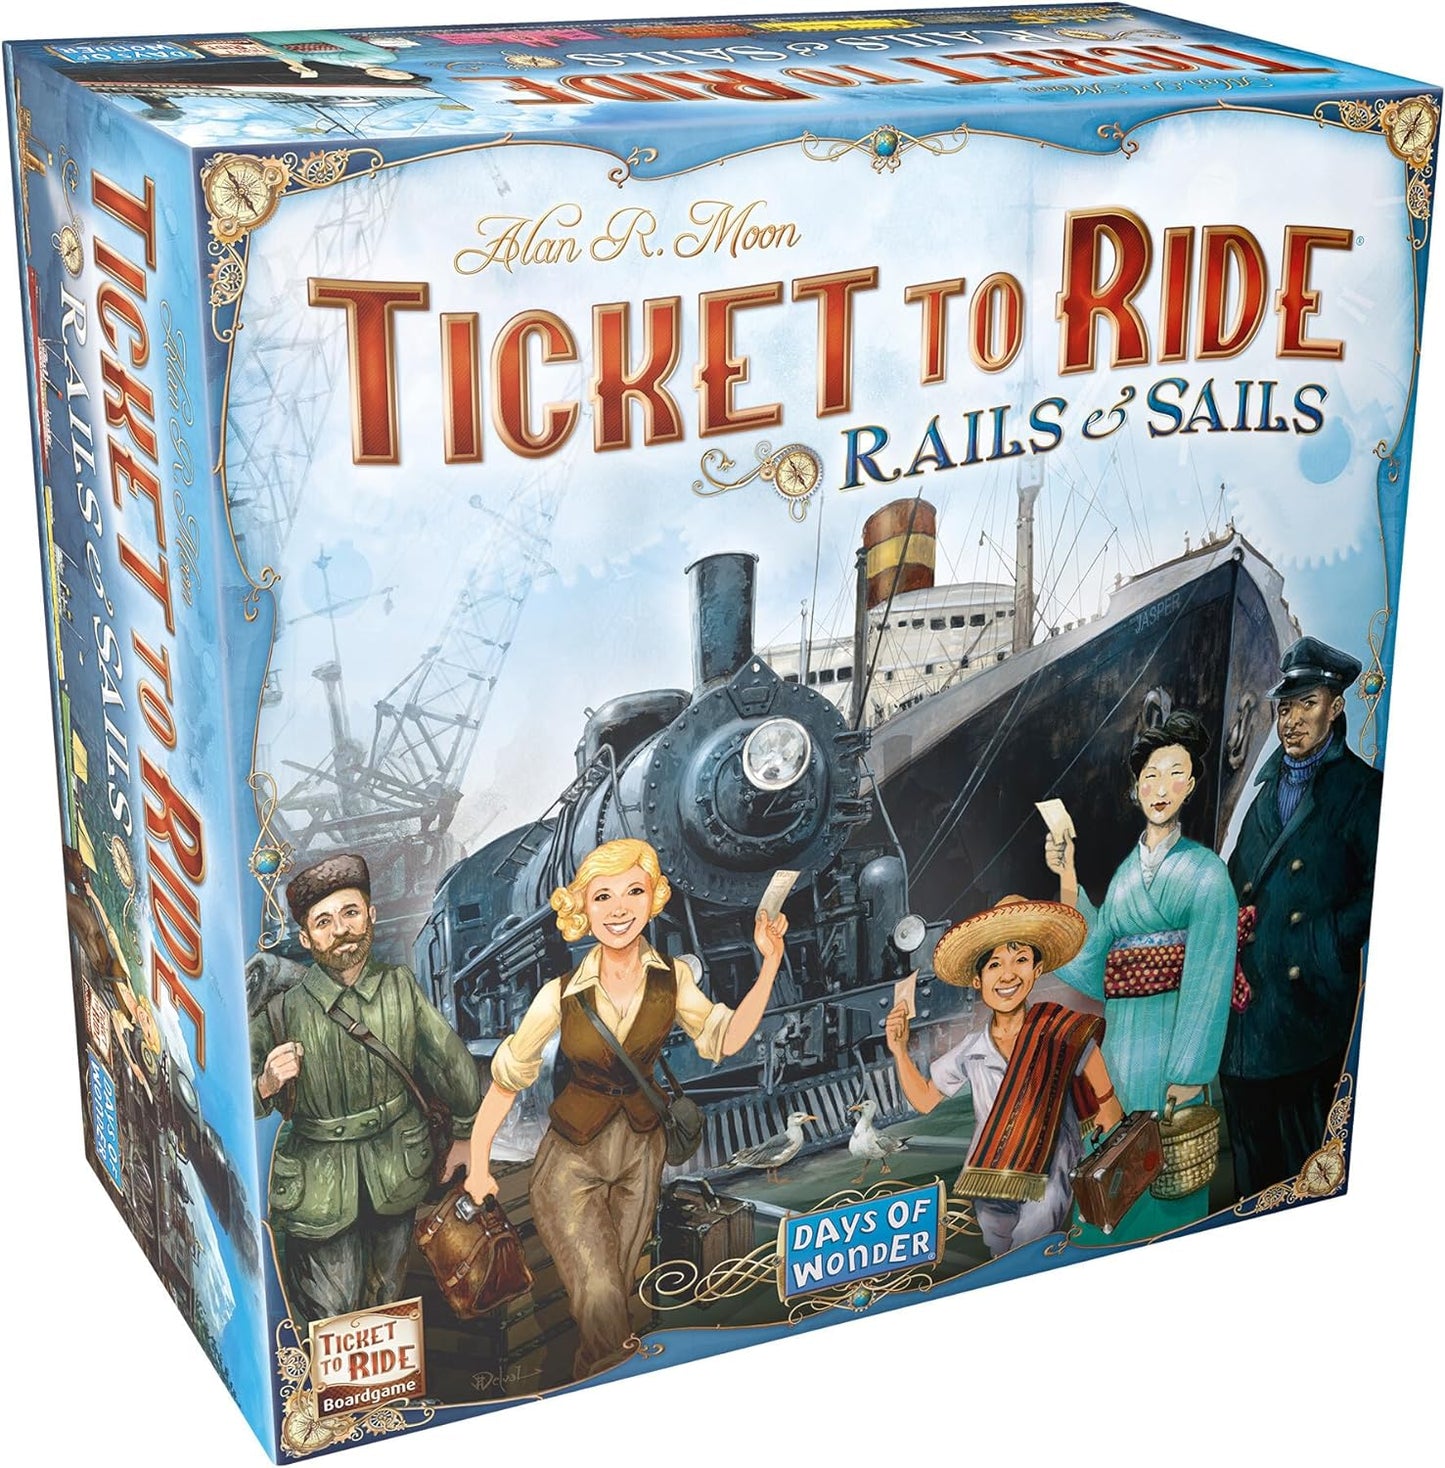 Ticket to Ride: Rails to Sails